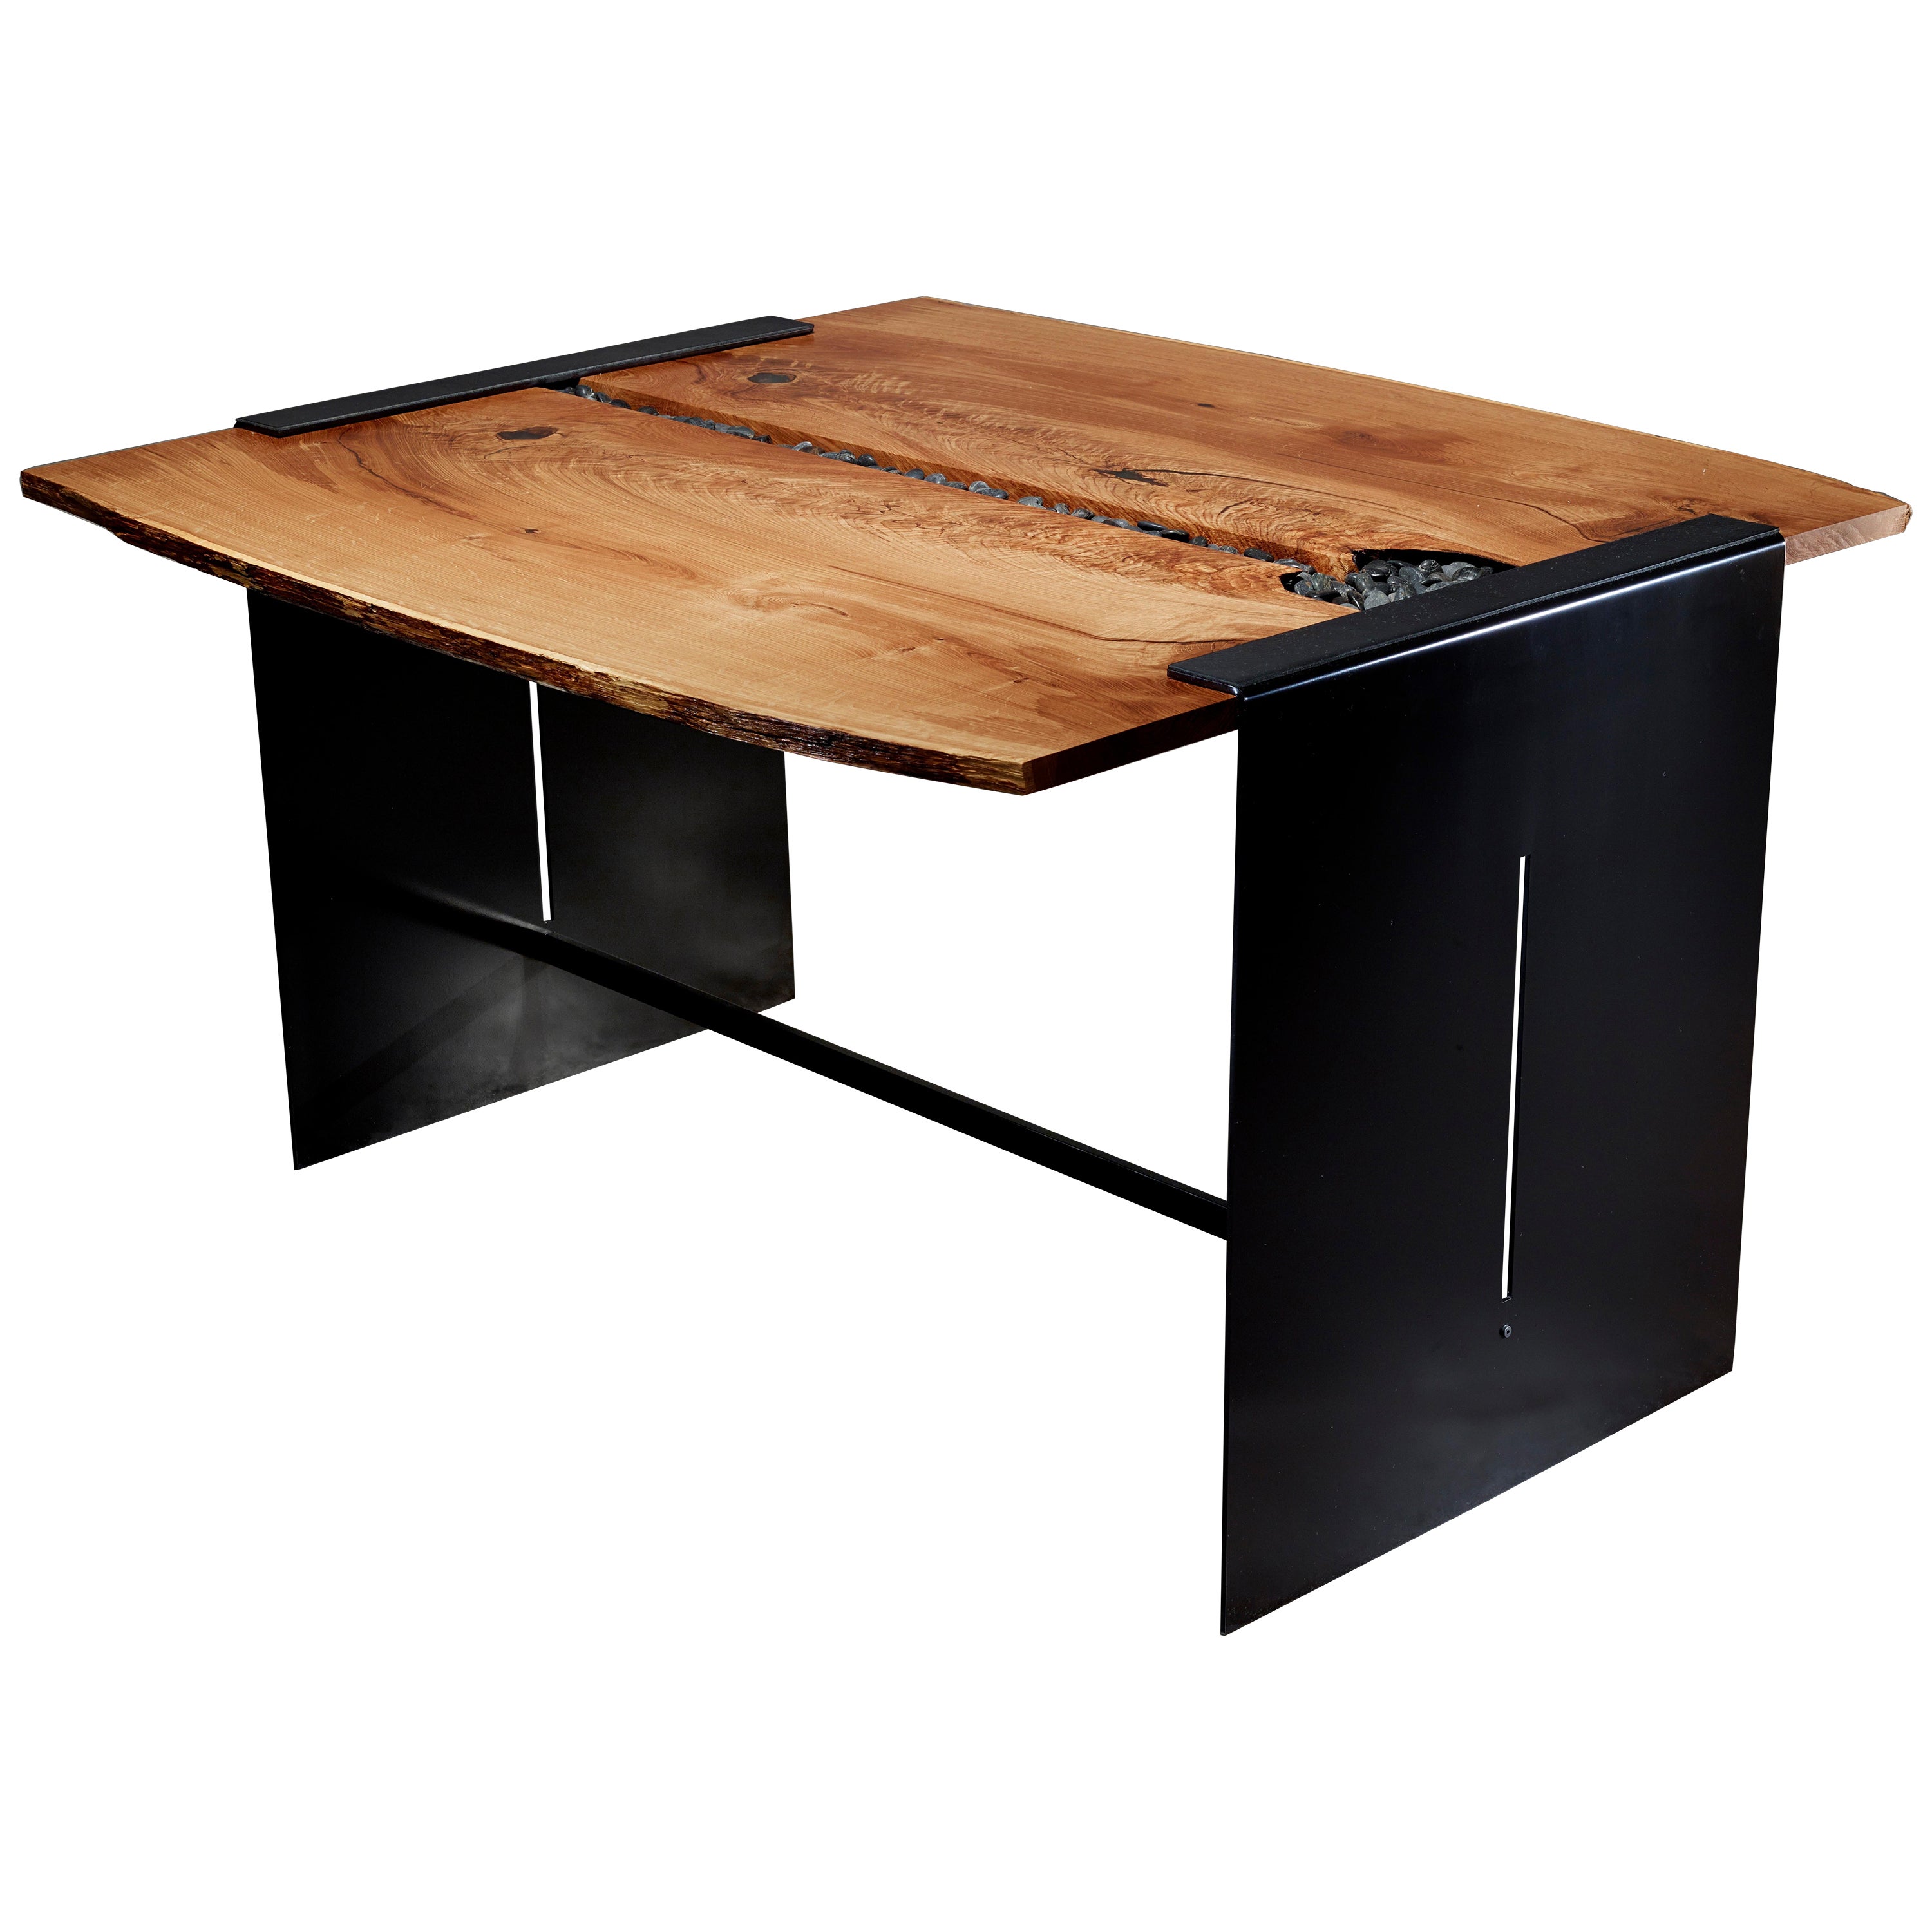 Organic Modern Dining Table with California White Oak and Aluminum: Tranquility For Sale